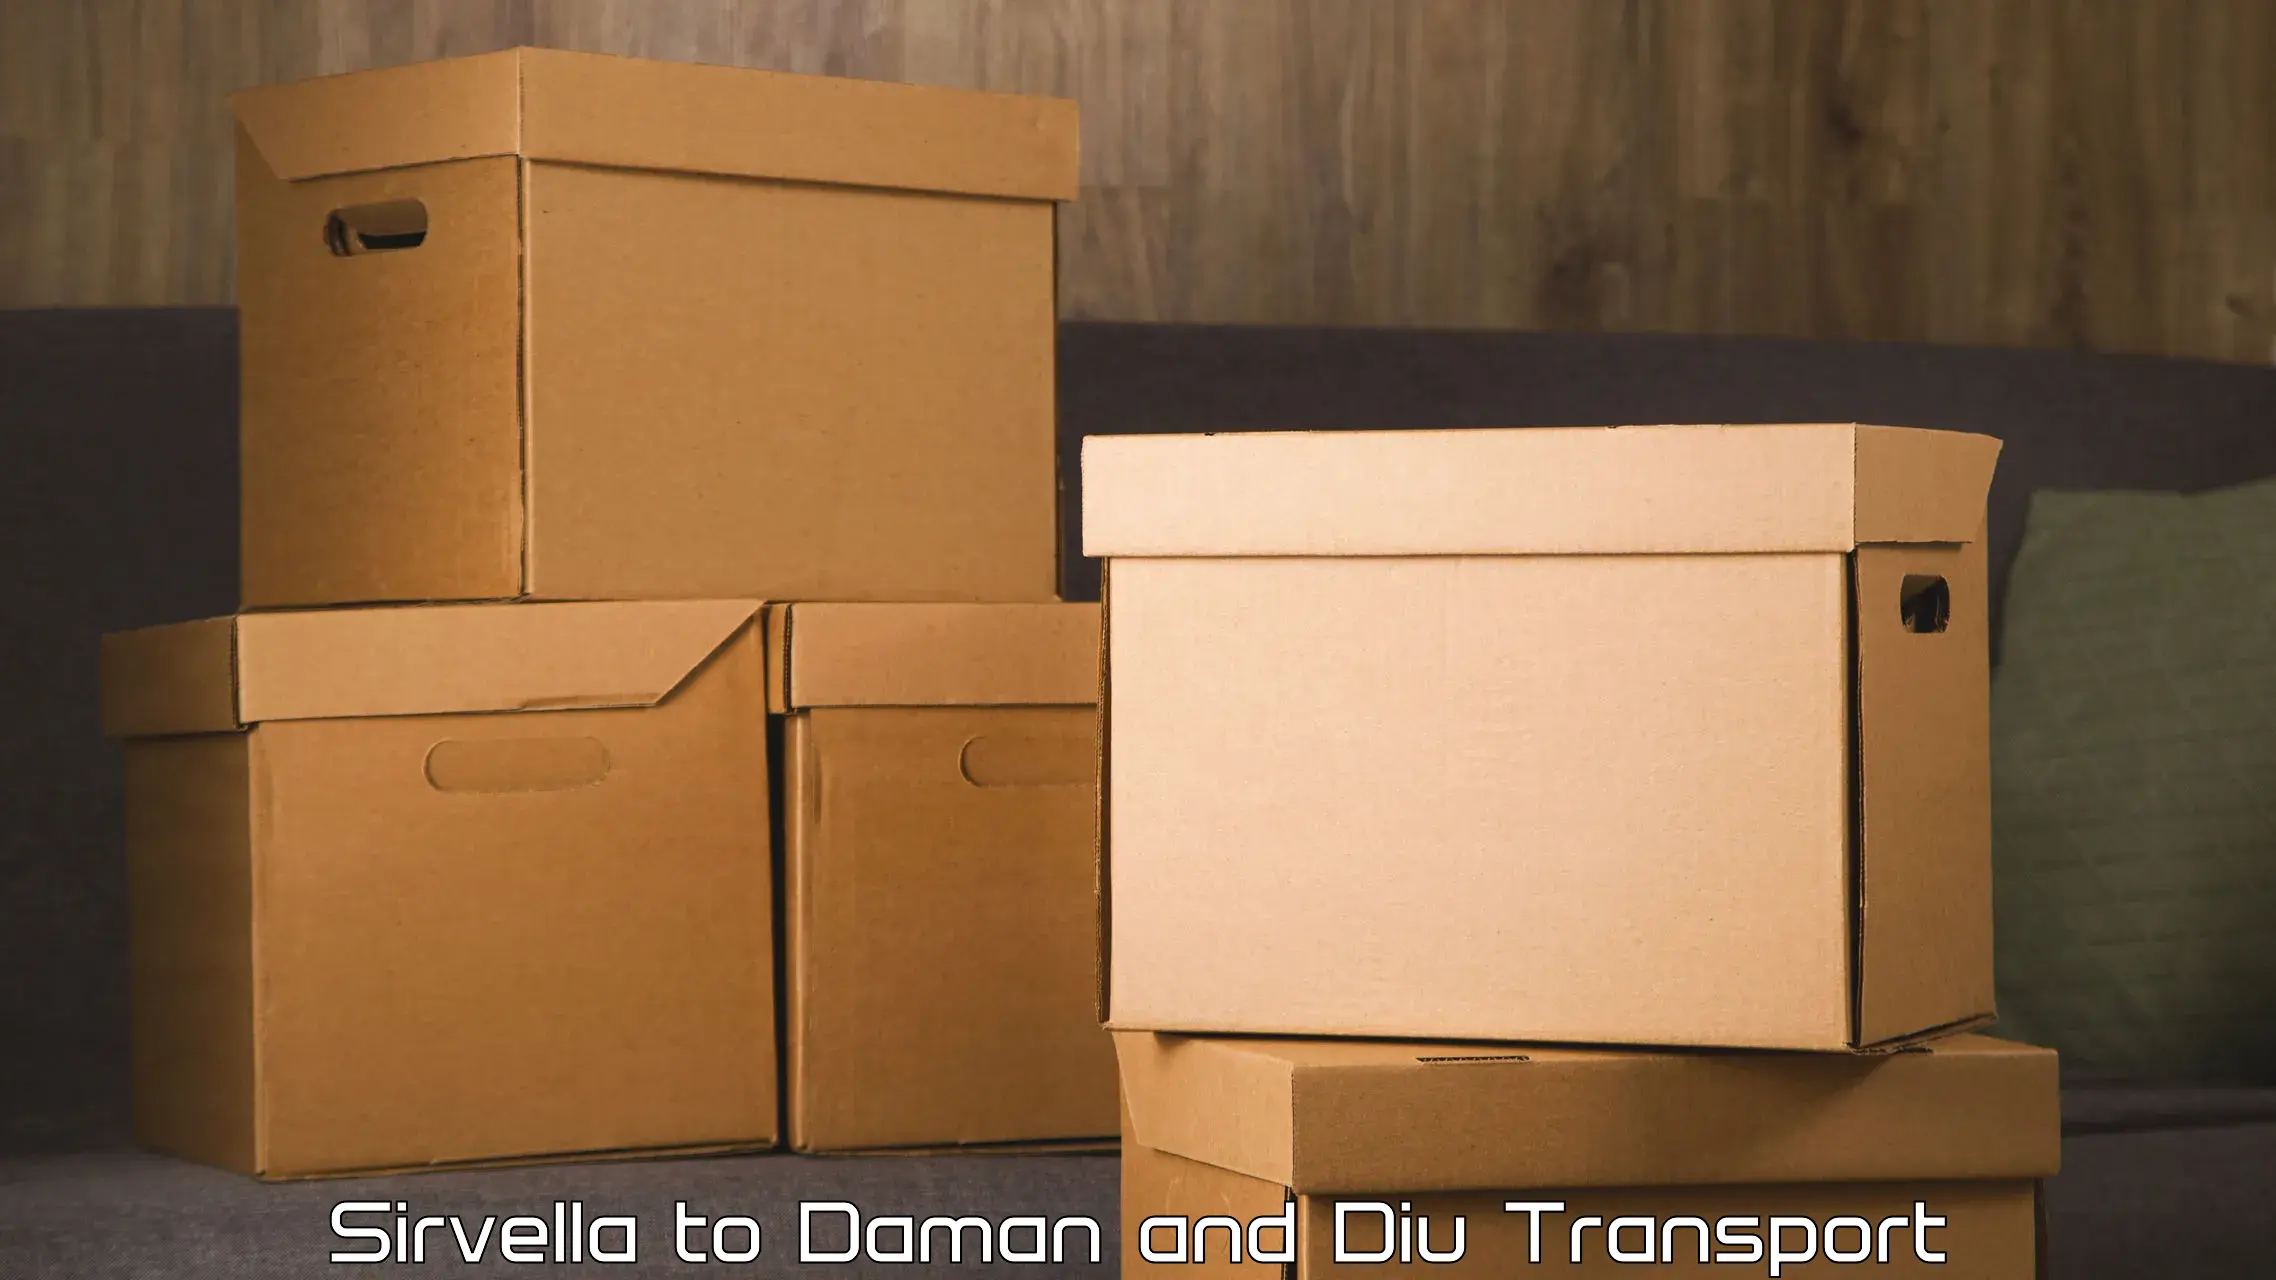 Domestic goods transportation services Sirvella to Diu